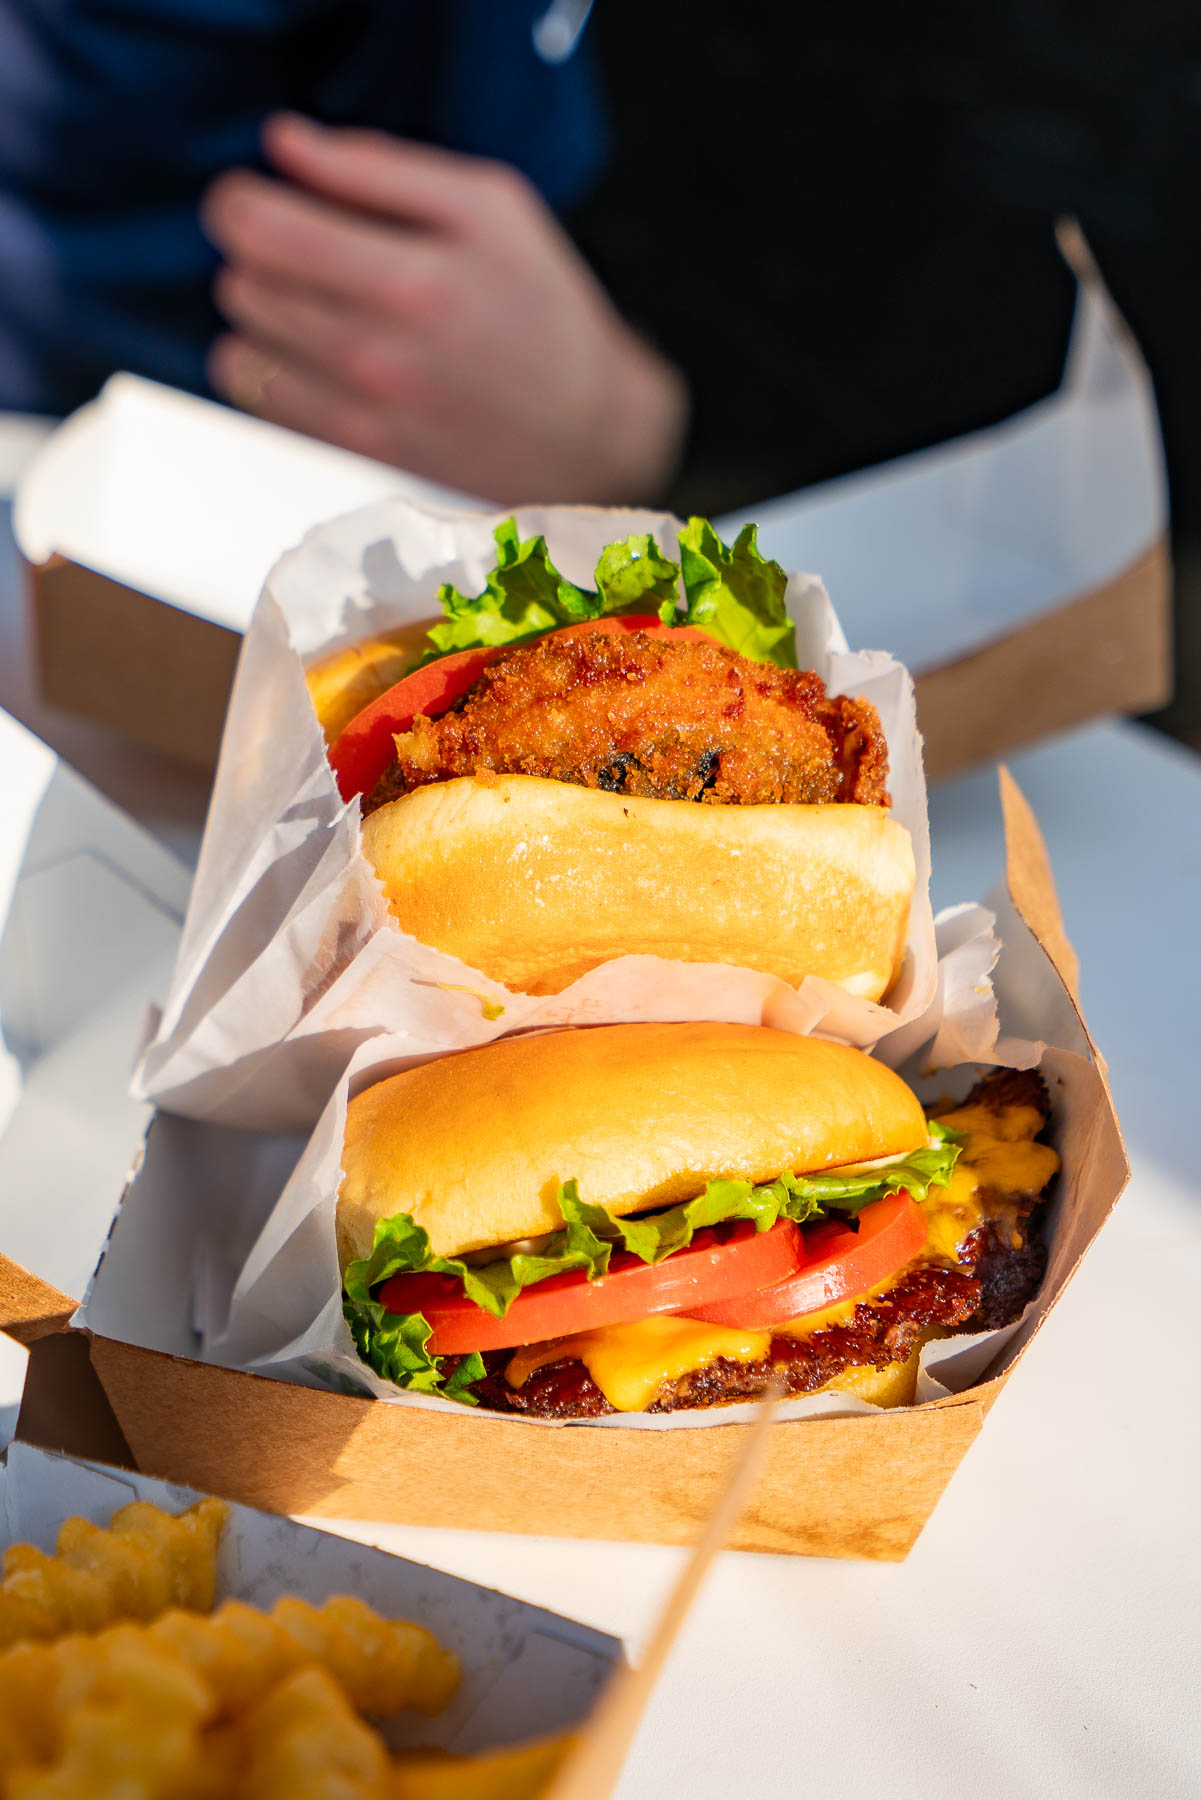 Chicken burger and cheeseburger from Shake Shack in NYC, things to do
restaurants near Central Park